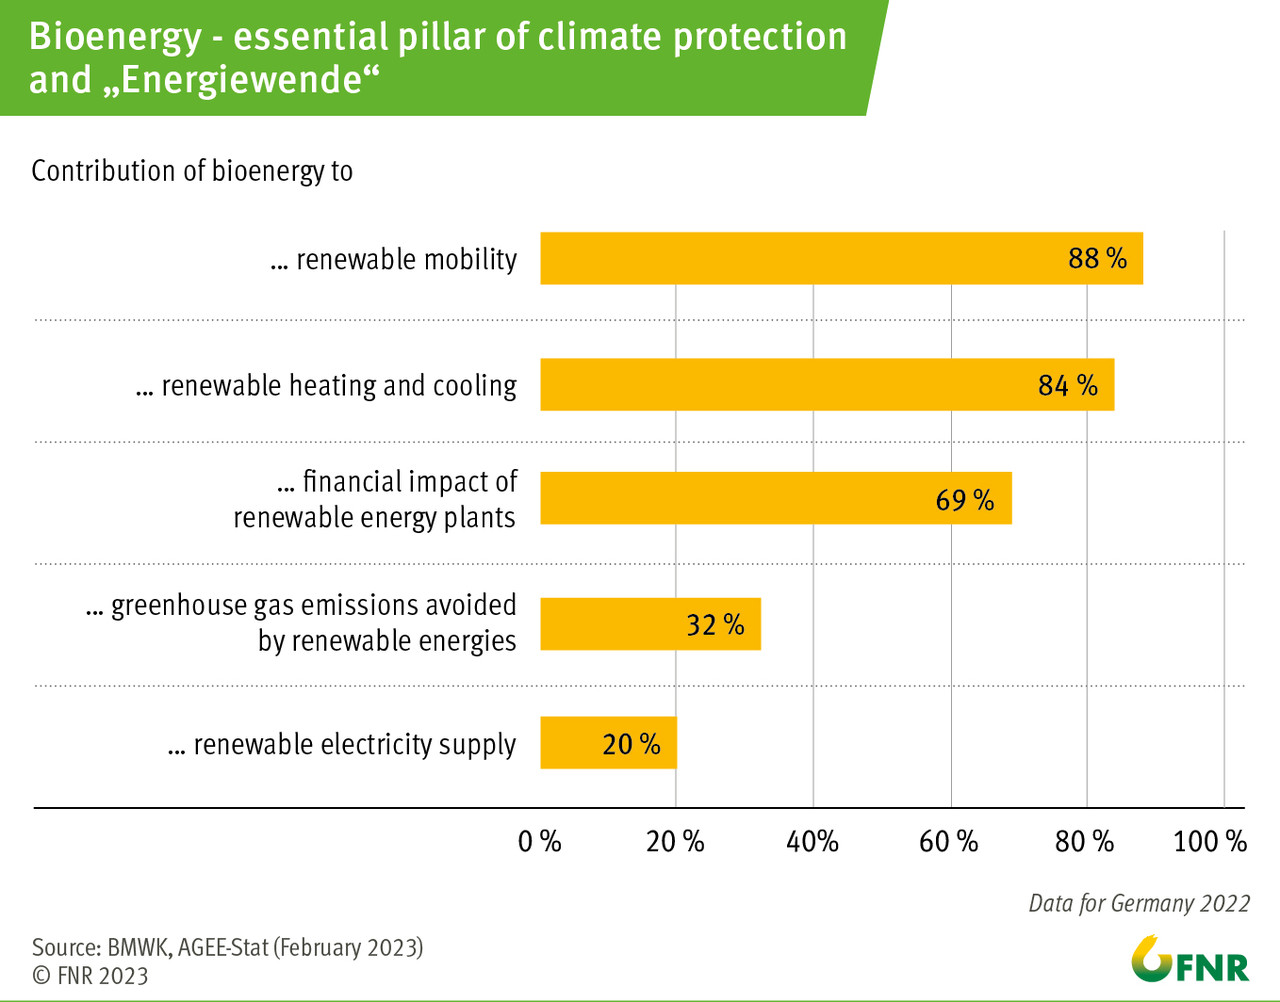 Bioenergy – essential pillar of climate protection and "Energiewende"